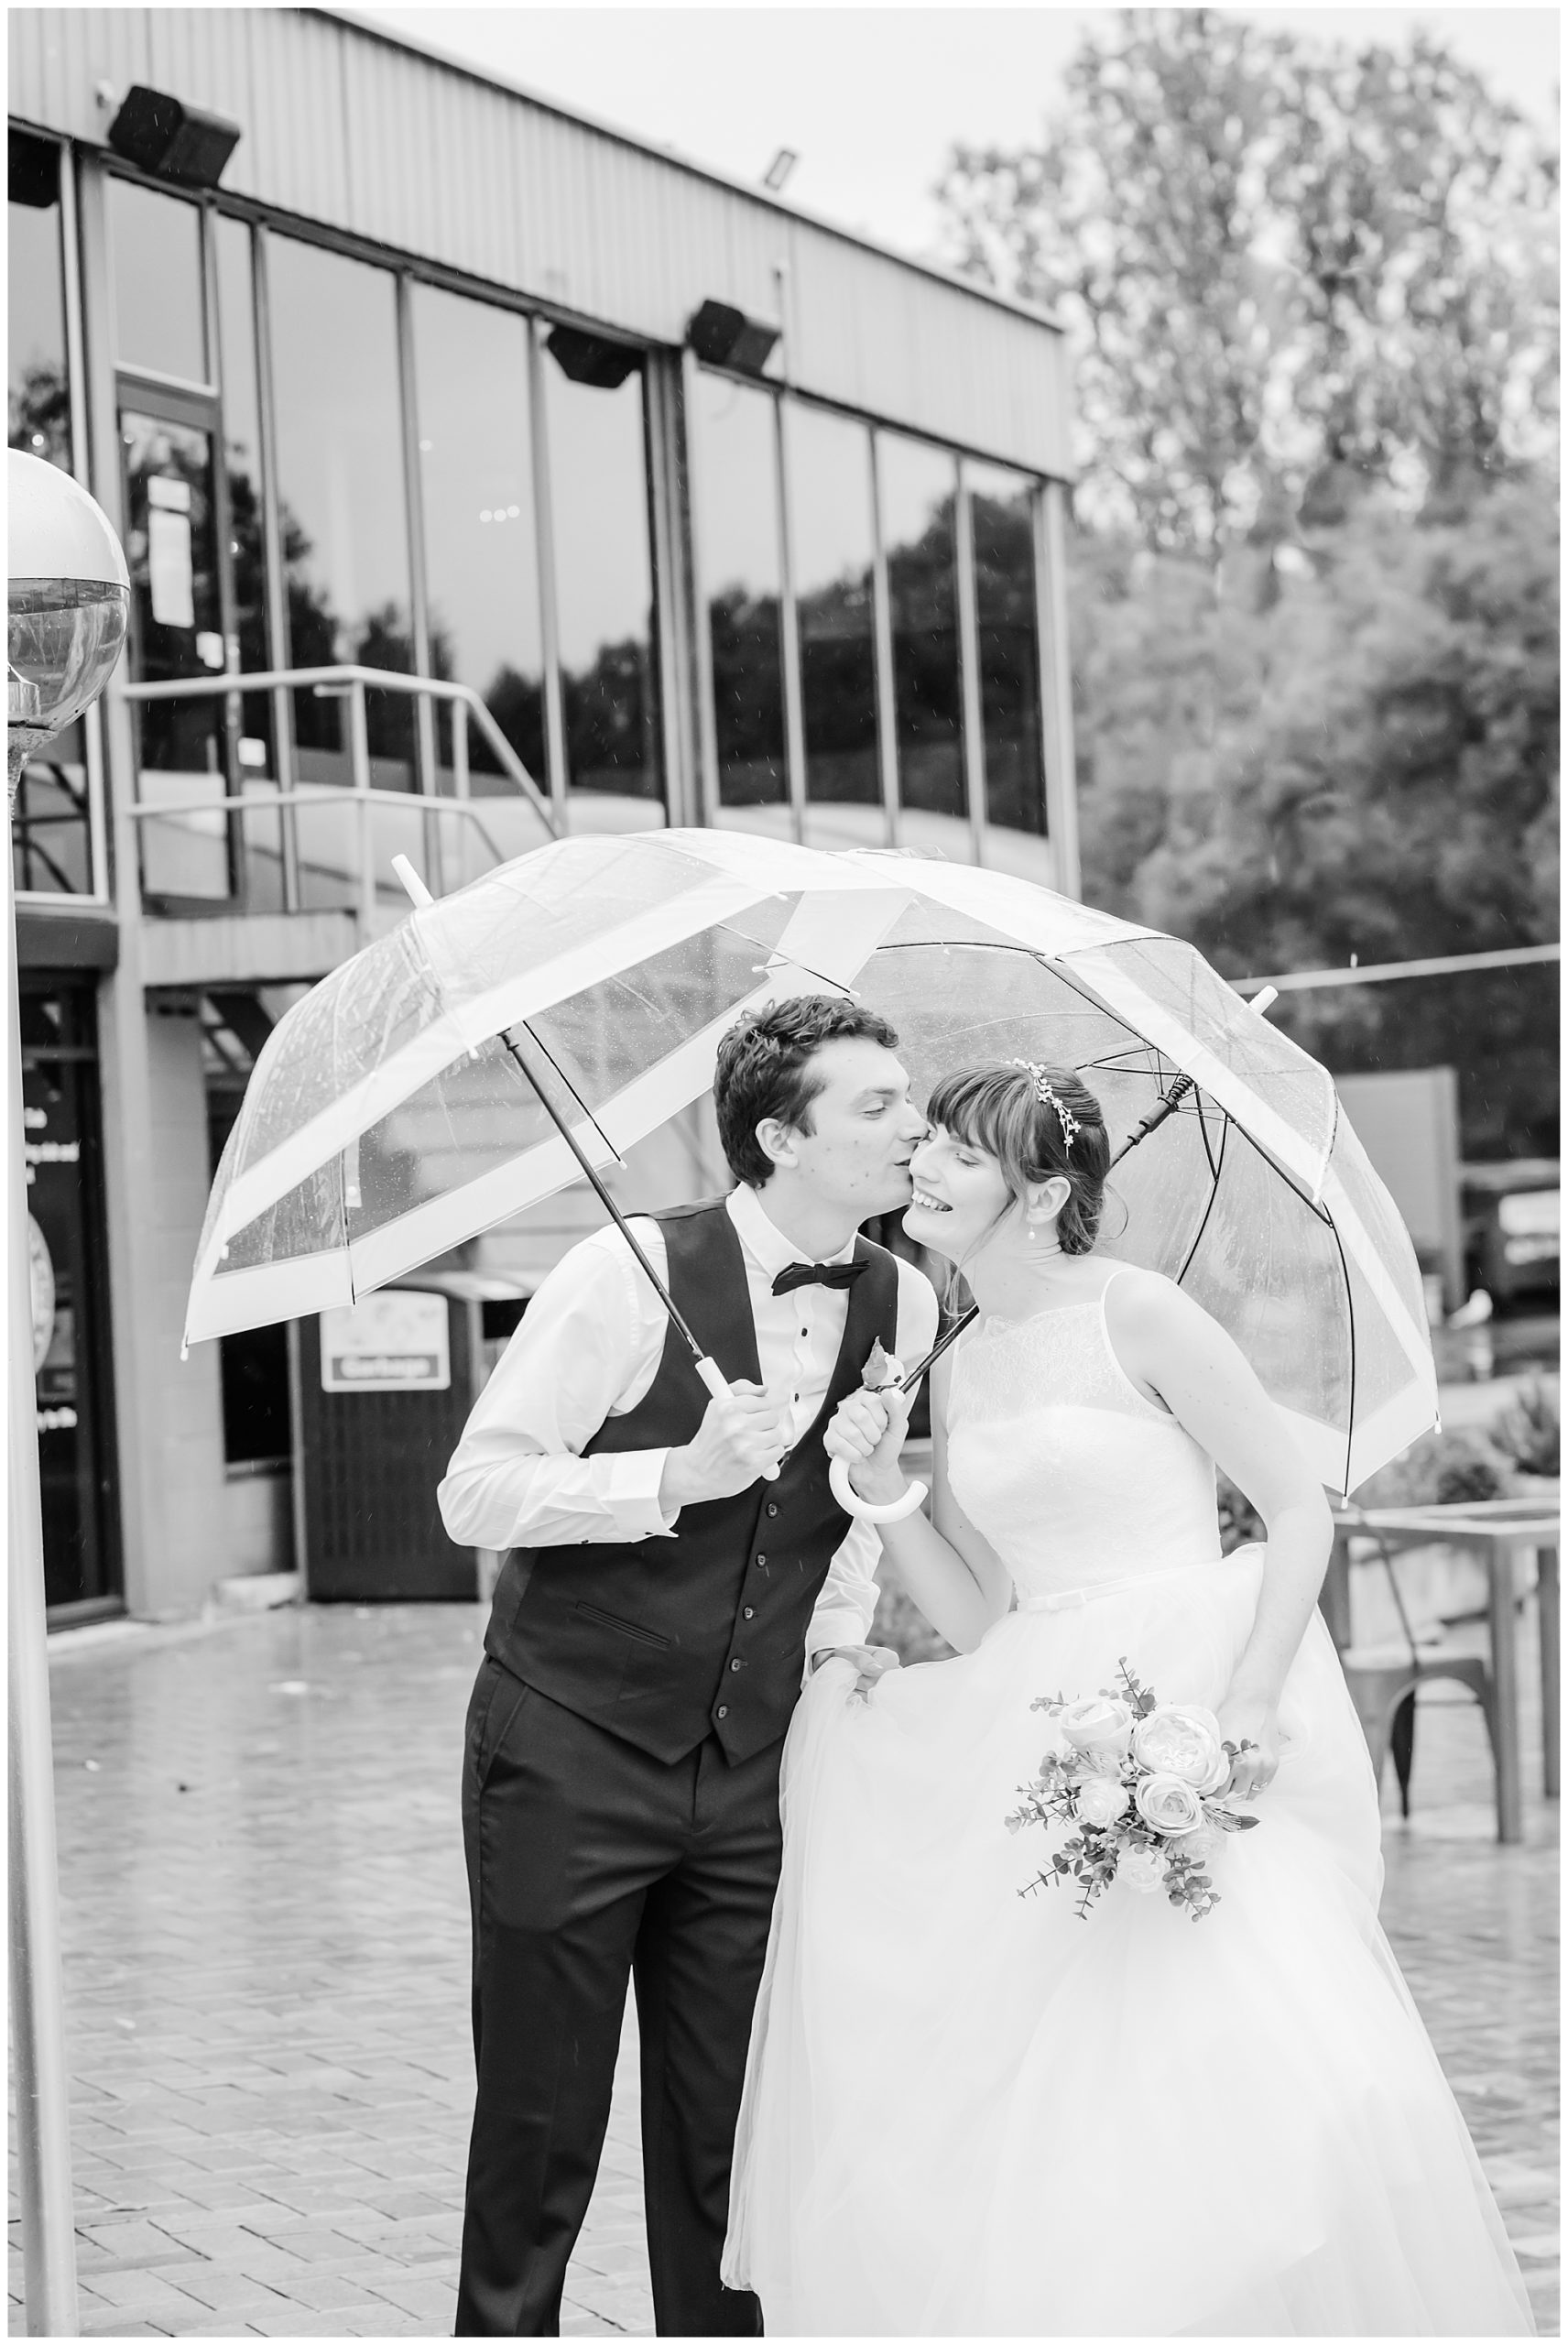 Canberra Wedding photographers| Bride and groom with umbrellas  on a rainy day at the Yacht club